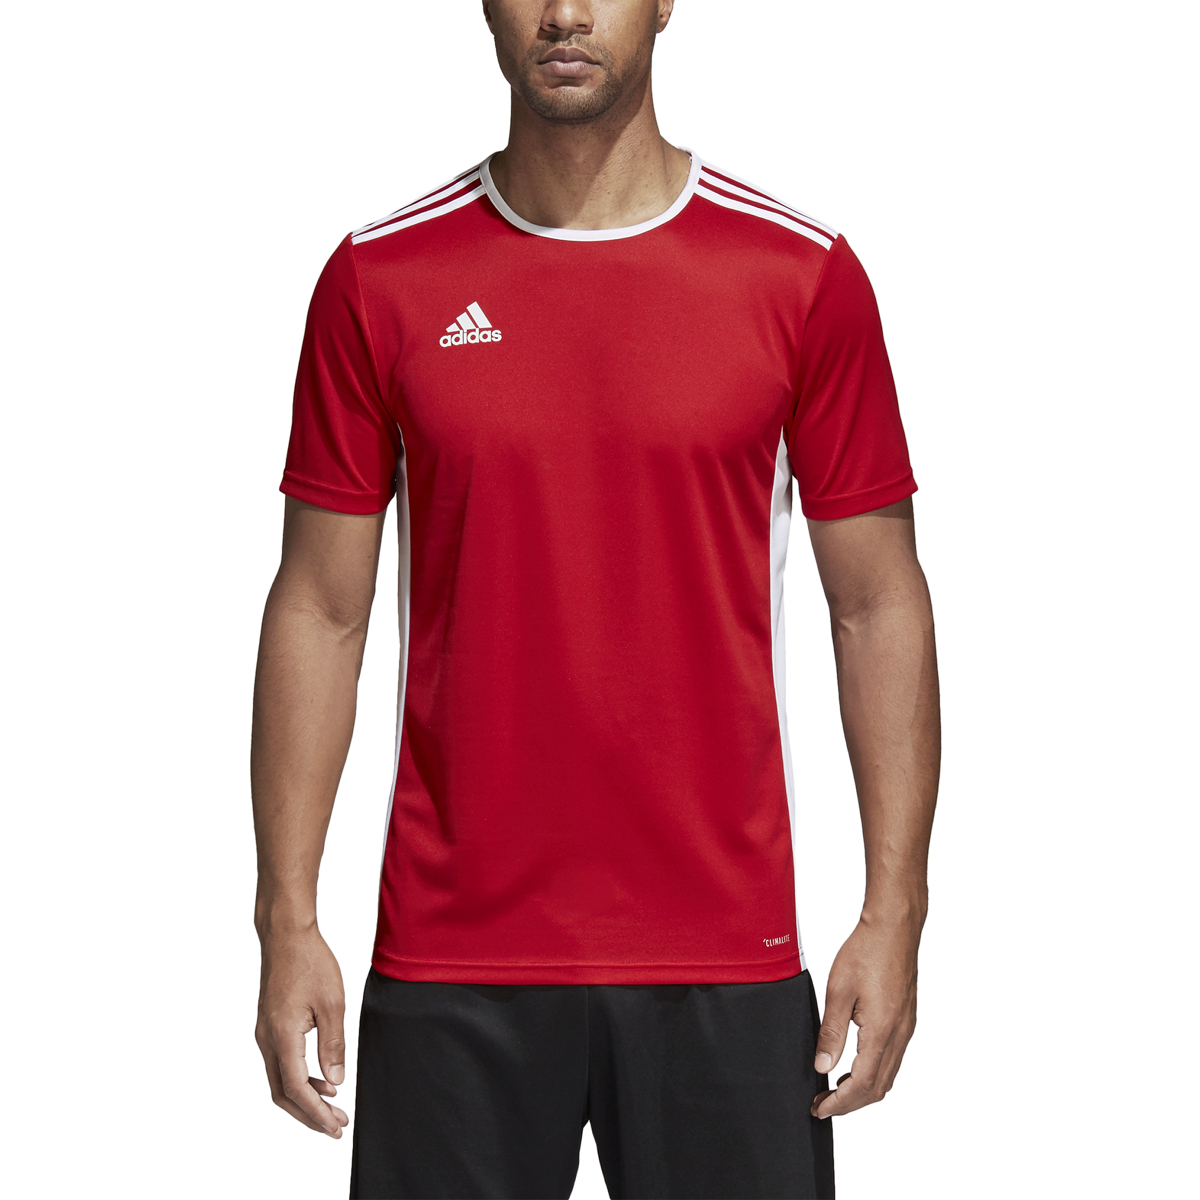 Men's Adidas Entrada 18 Soccer Jersey Red/White - XL - image 1 of 6